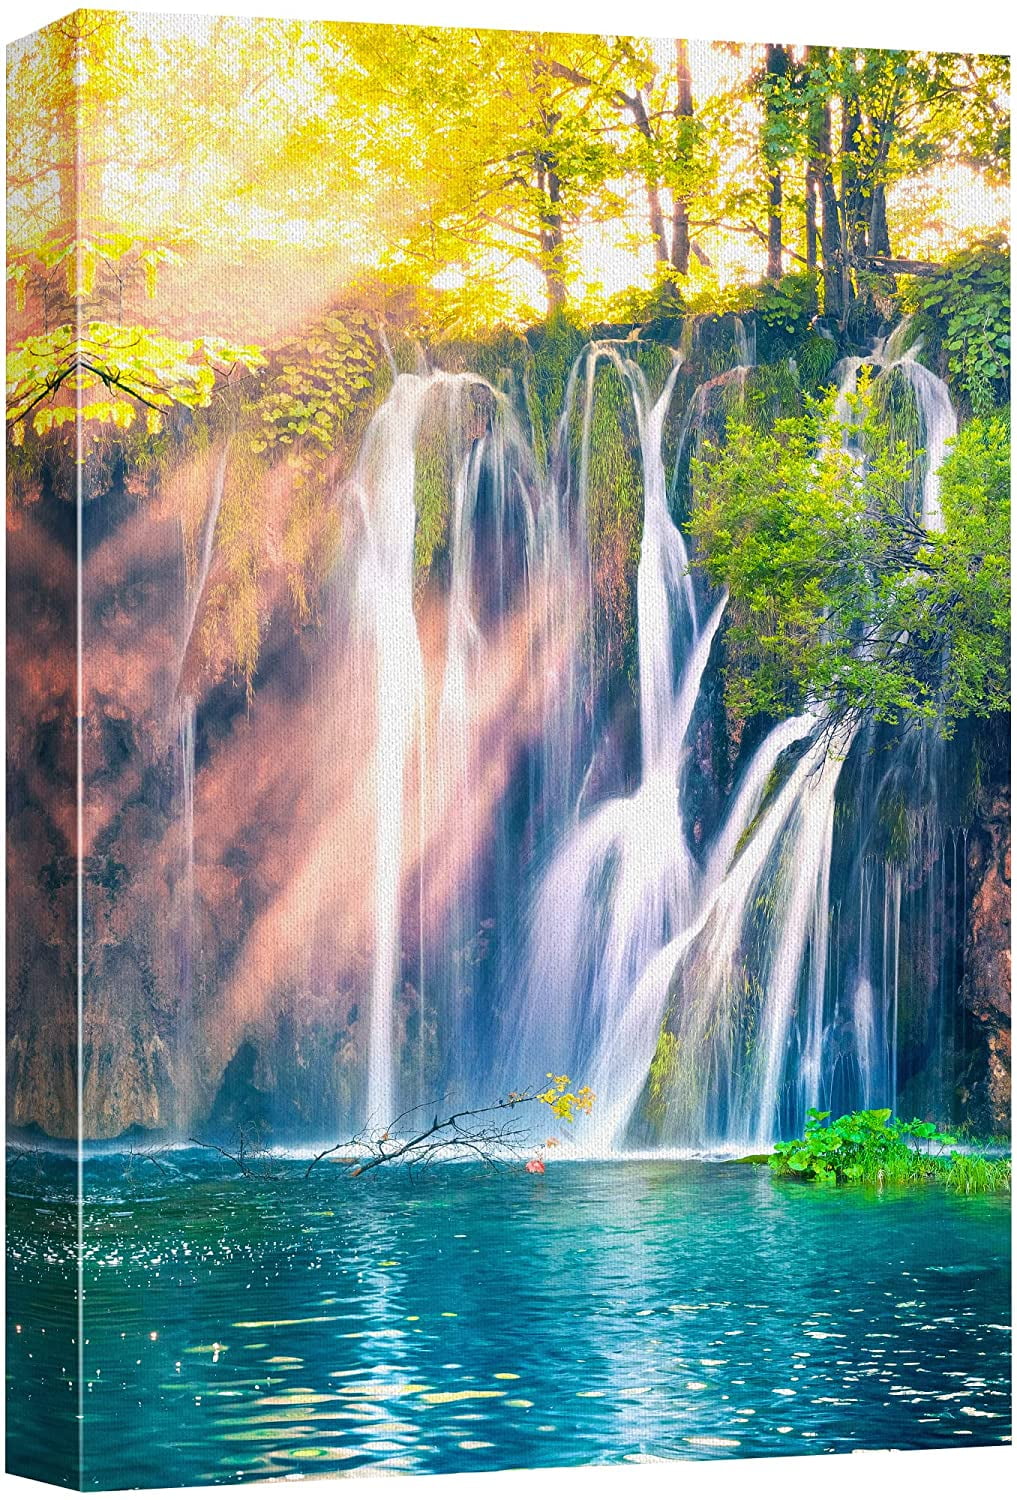 wall26 Canvas Print Wall Art Morning Sunlight Forest River Waterfall Nature  Wilderness Photography Realism Decorative Landscape Relax/Calm Zen  Multicolor for Living Room, Bedroom, Office 32quot;x4